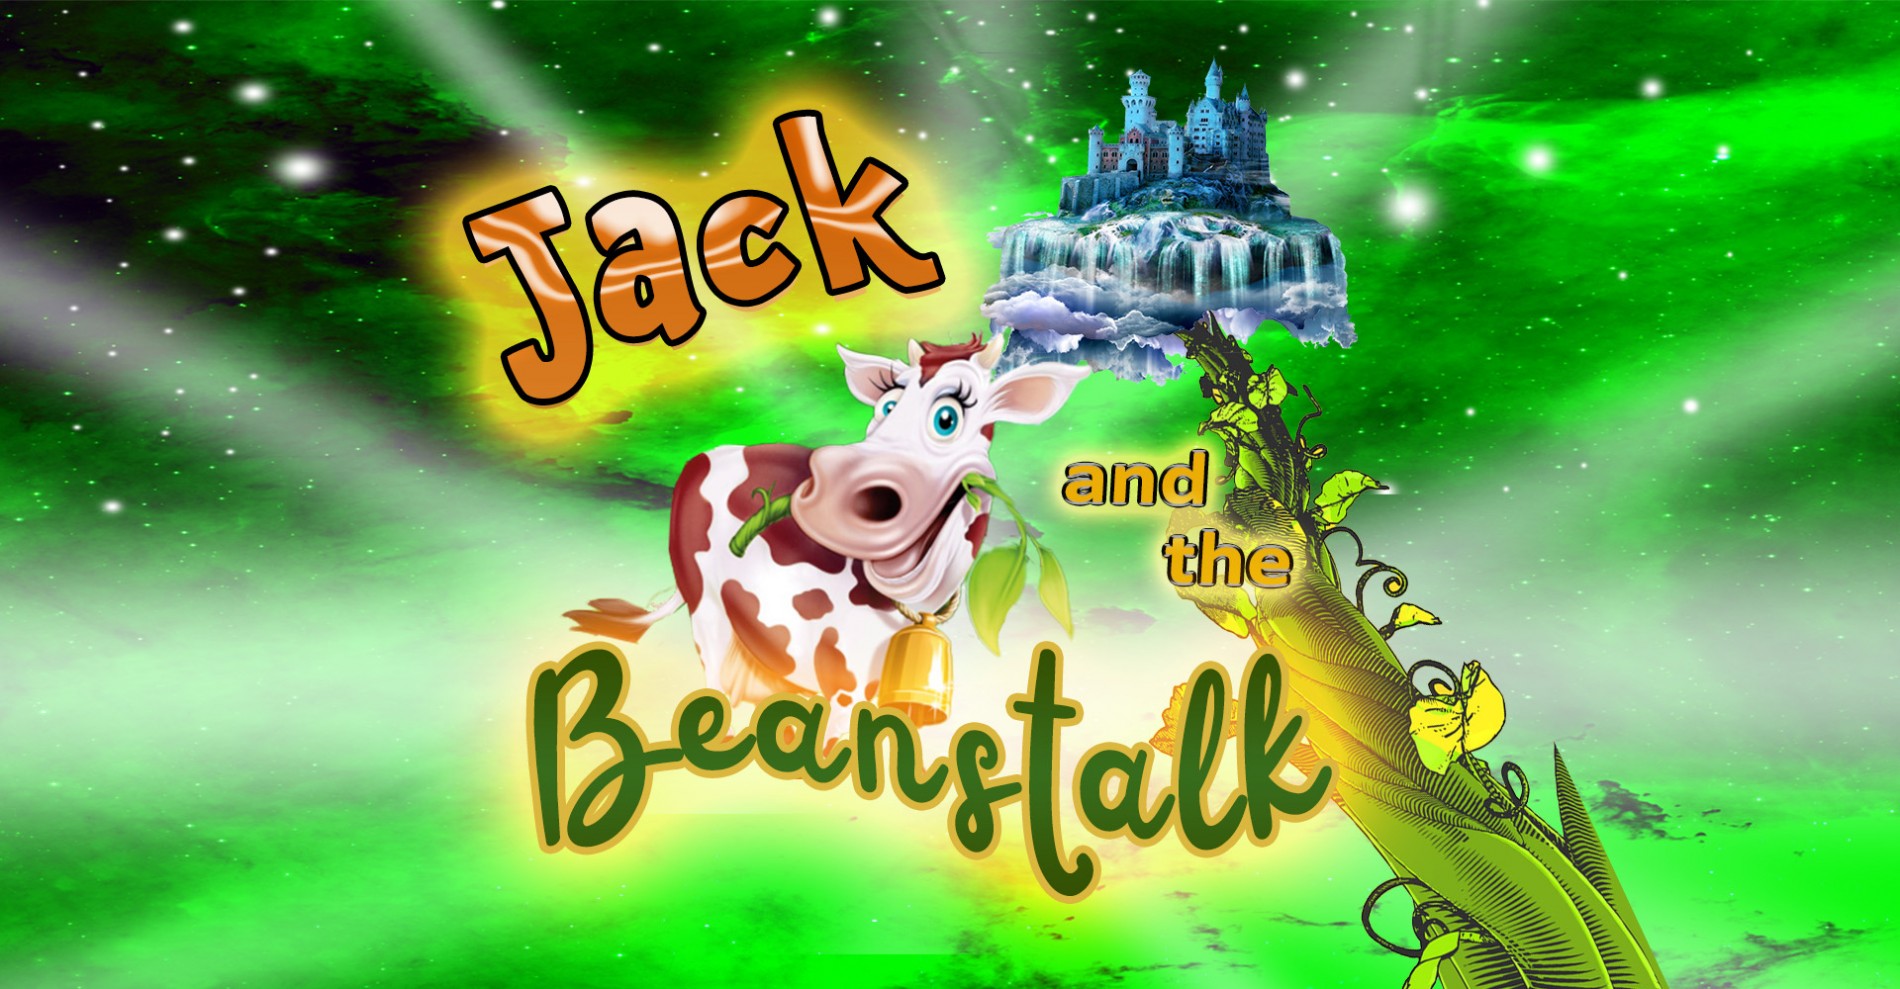 Jack and the beanstalk from Melanie